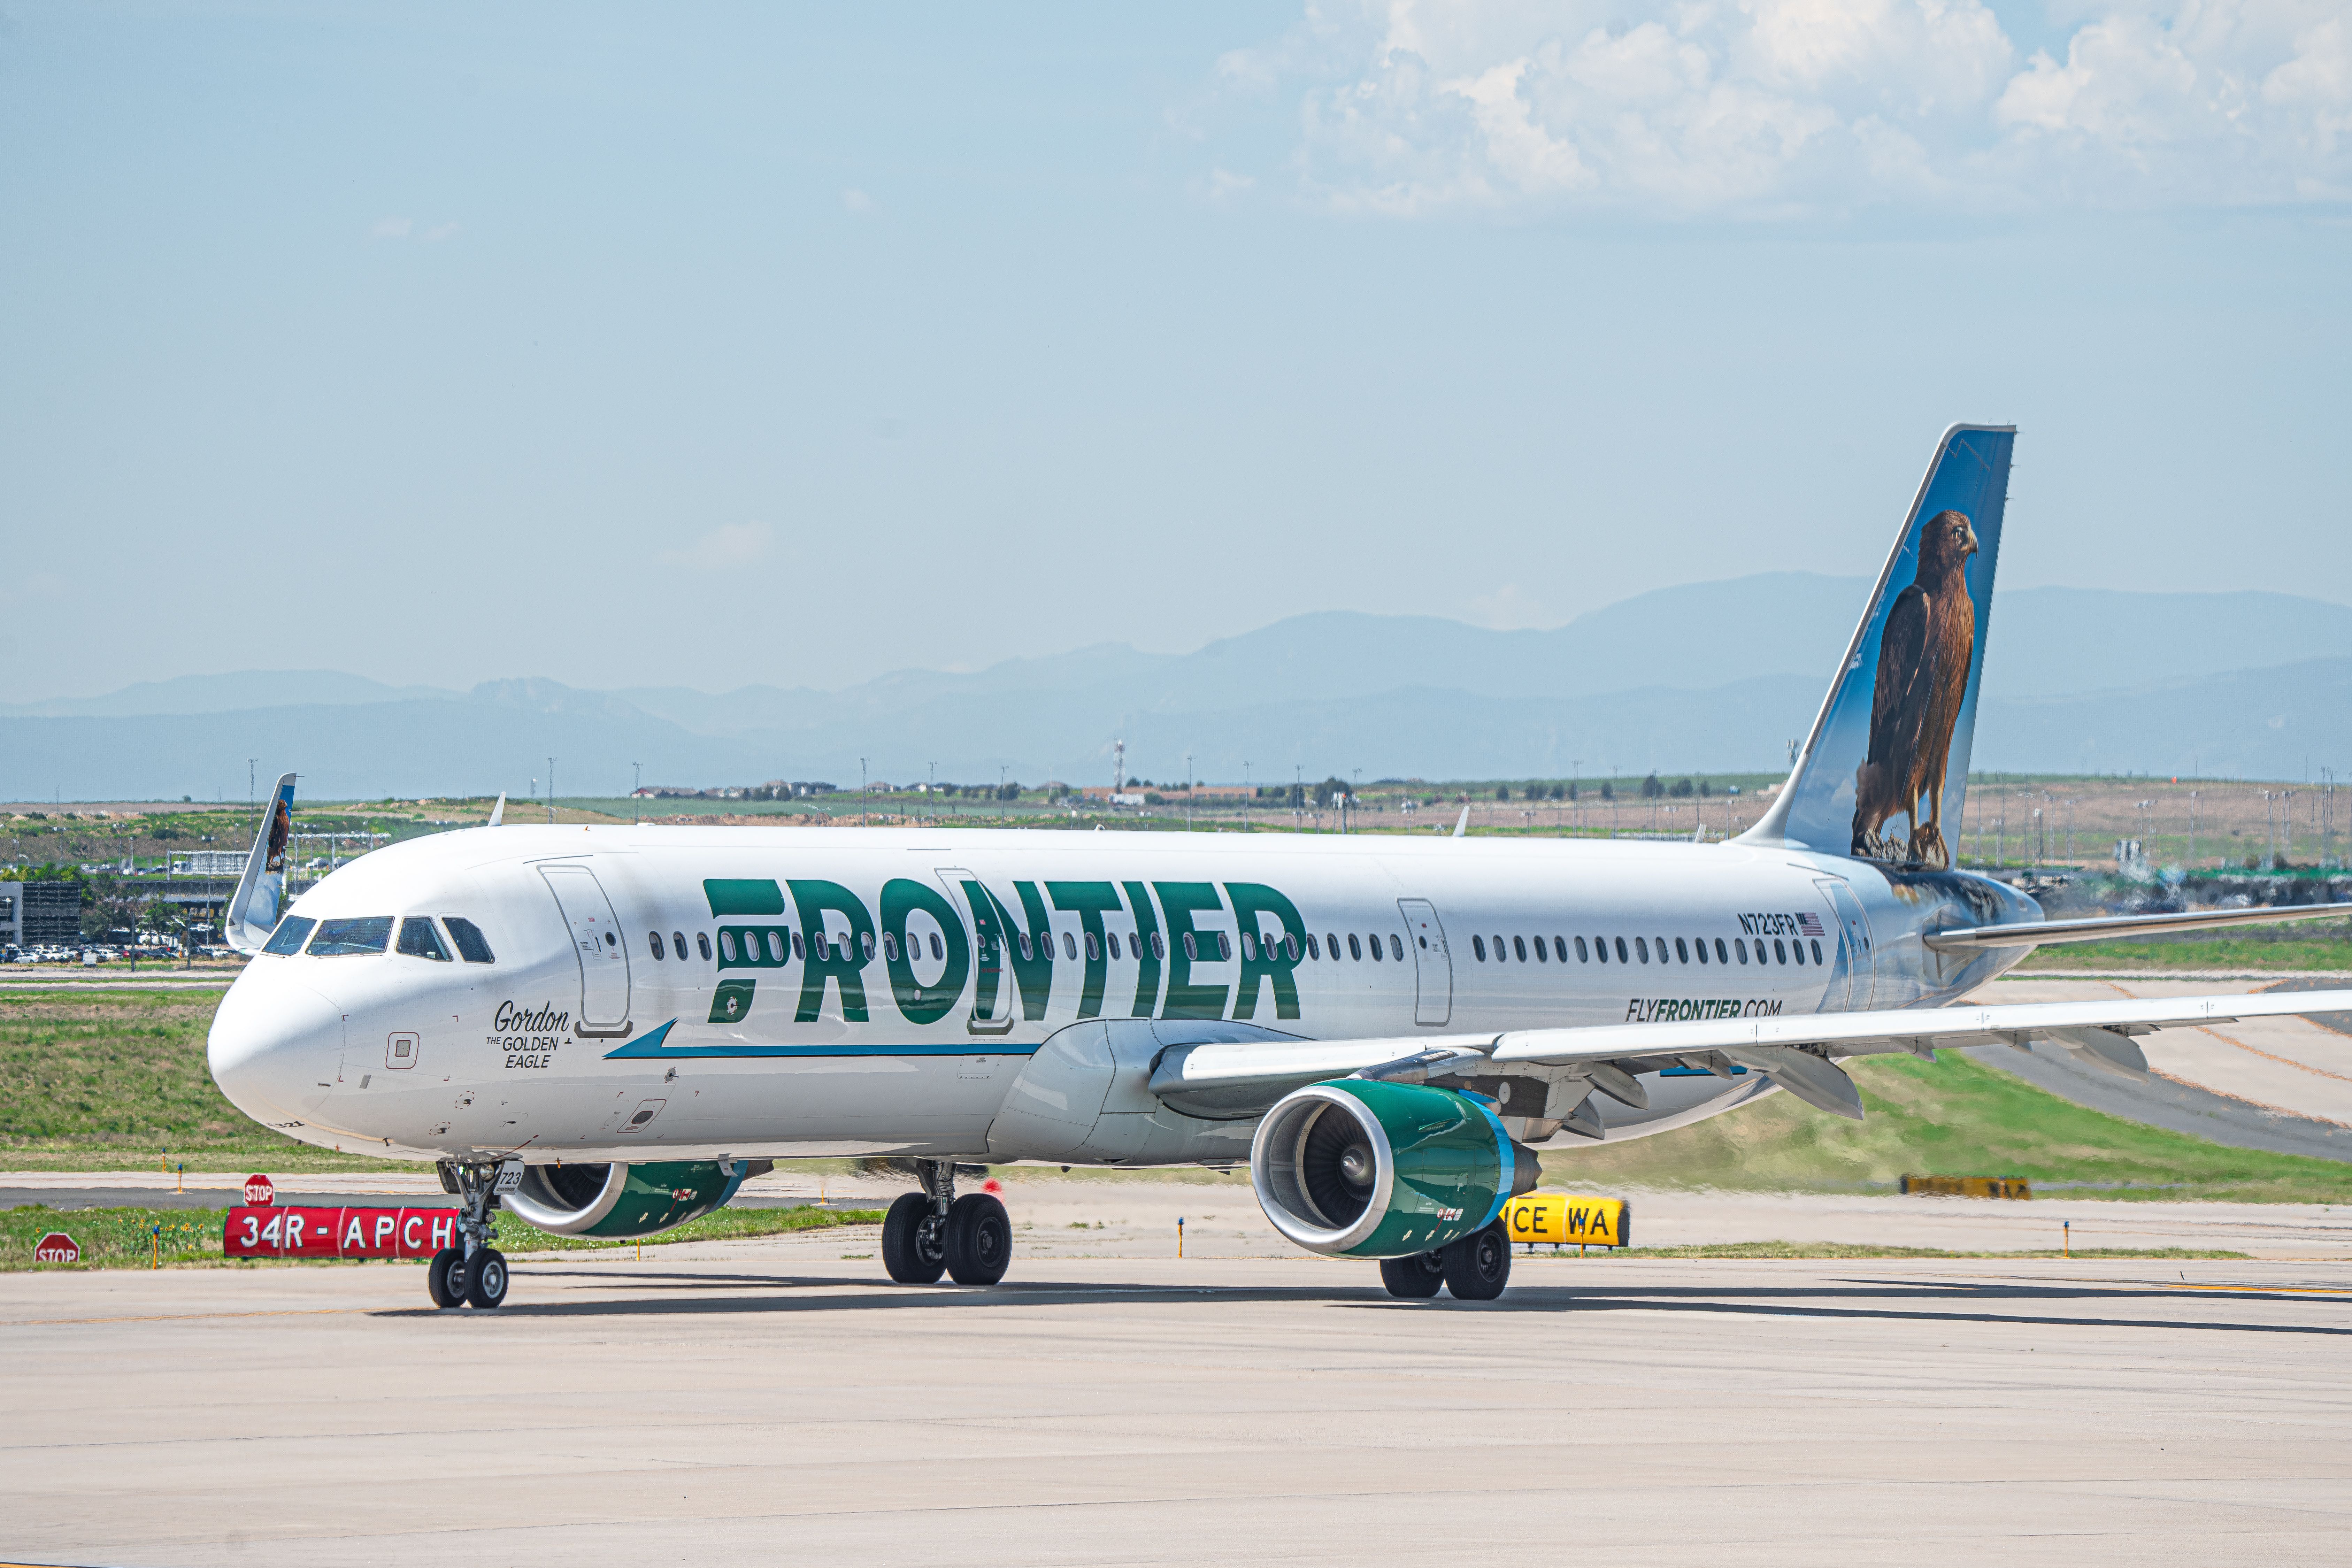 Frontier Airlines Airbus A321 at Denver International Airport.